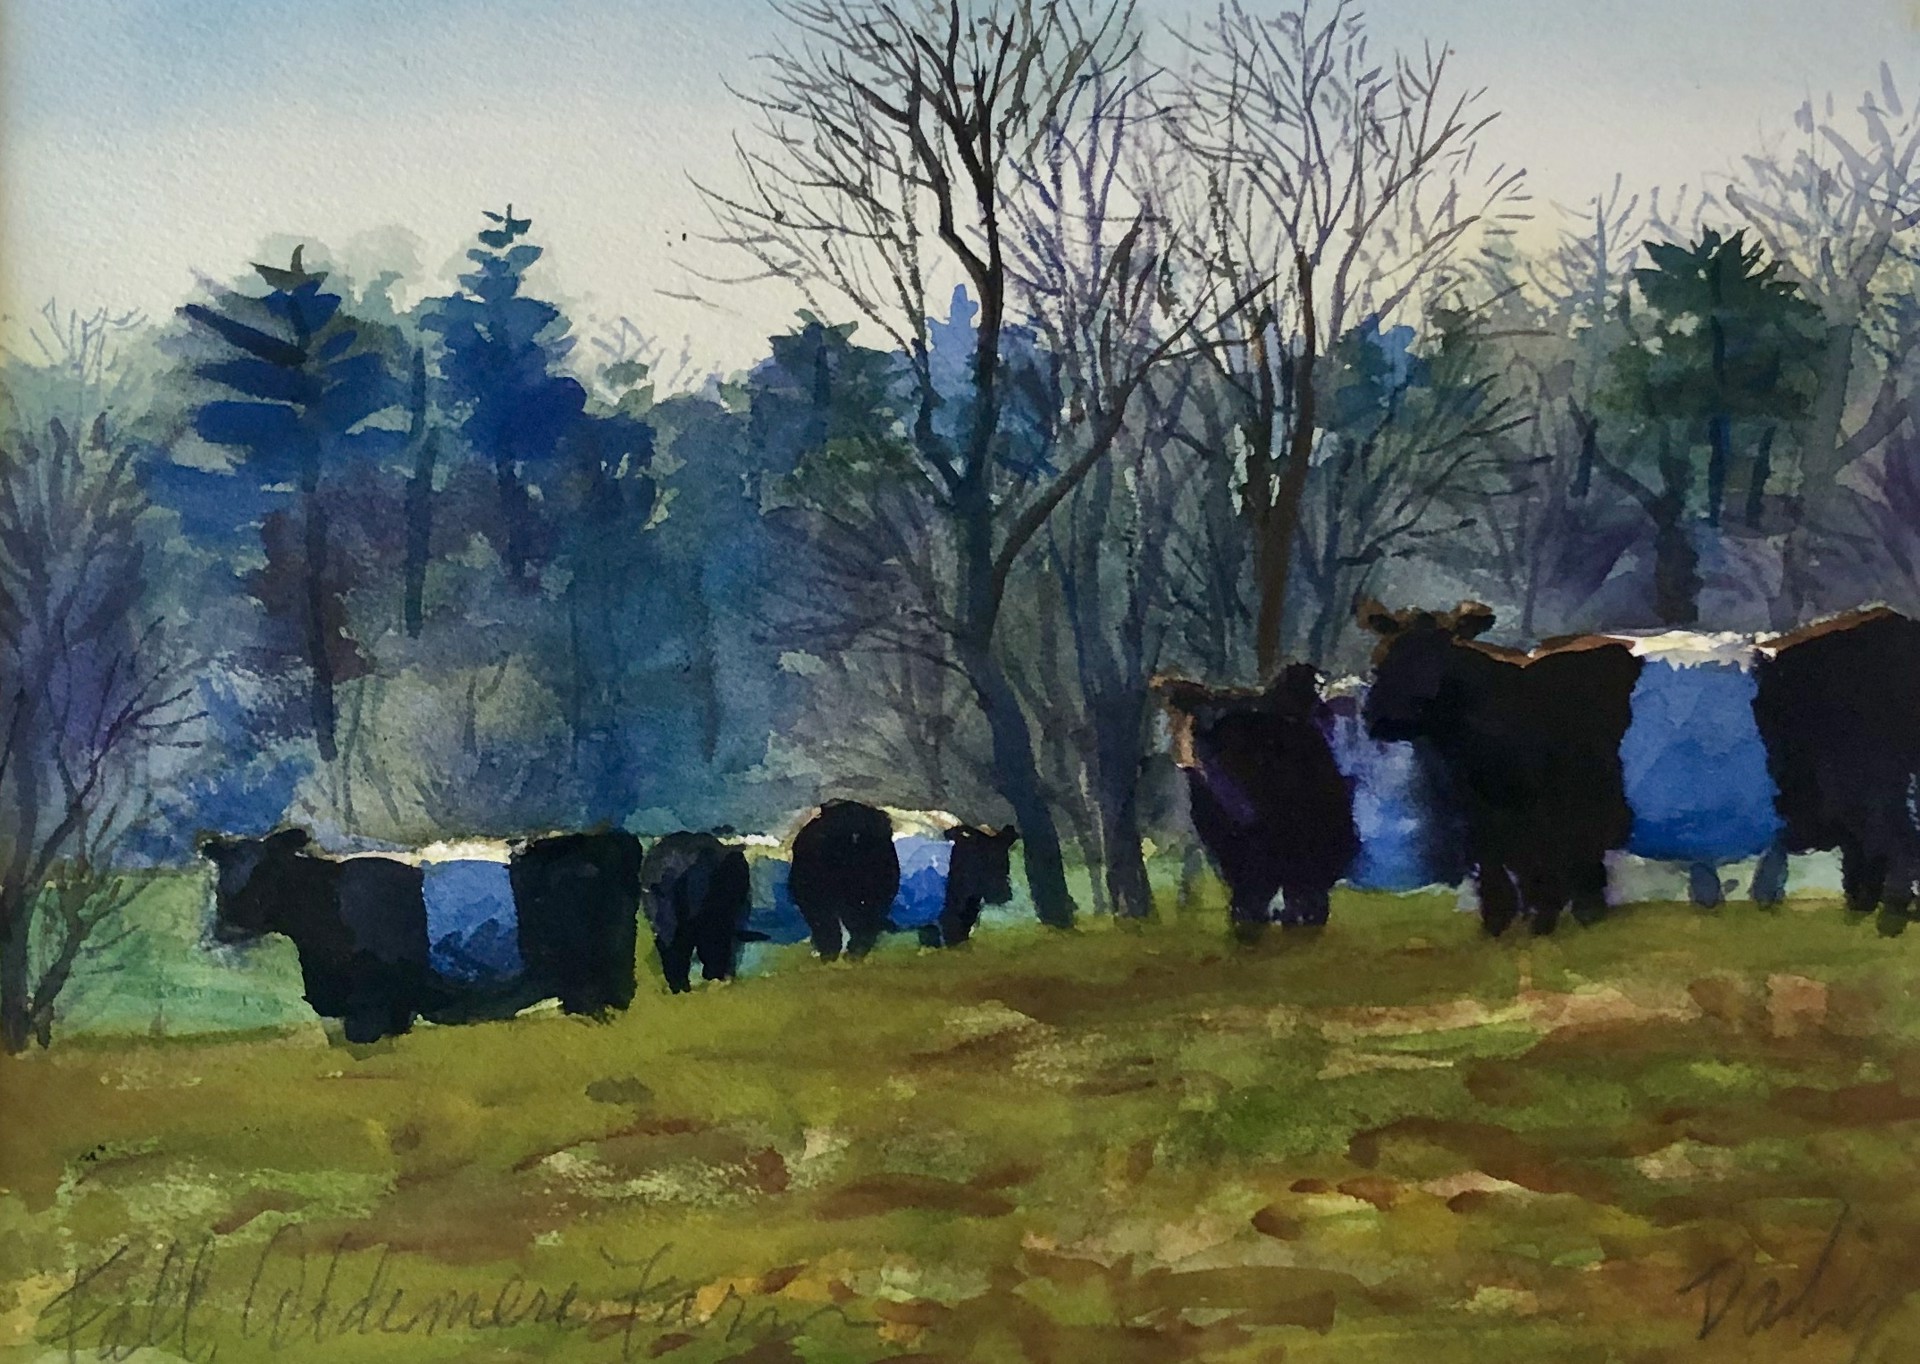 Belted Galloways, Aldermere Farm by Dan Daly